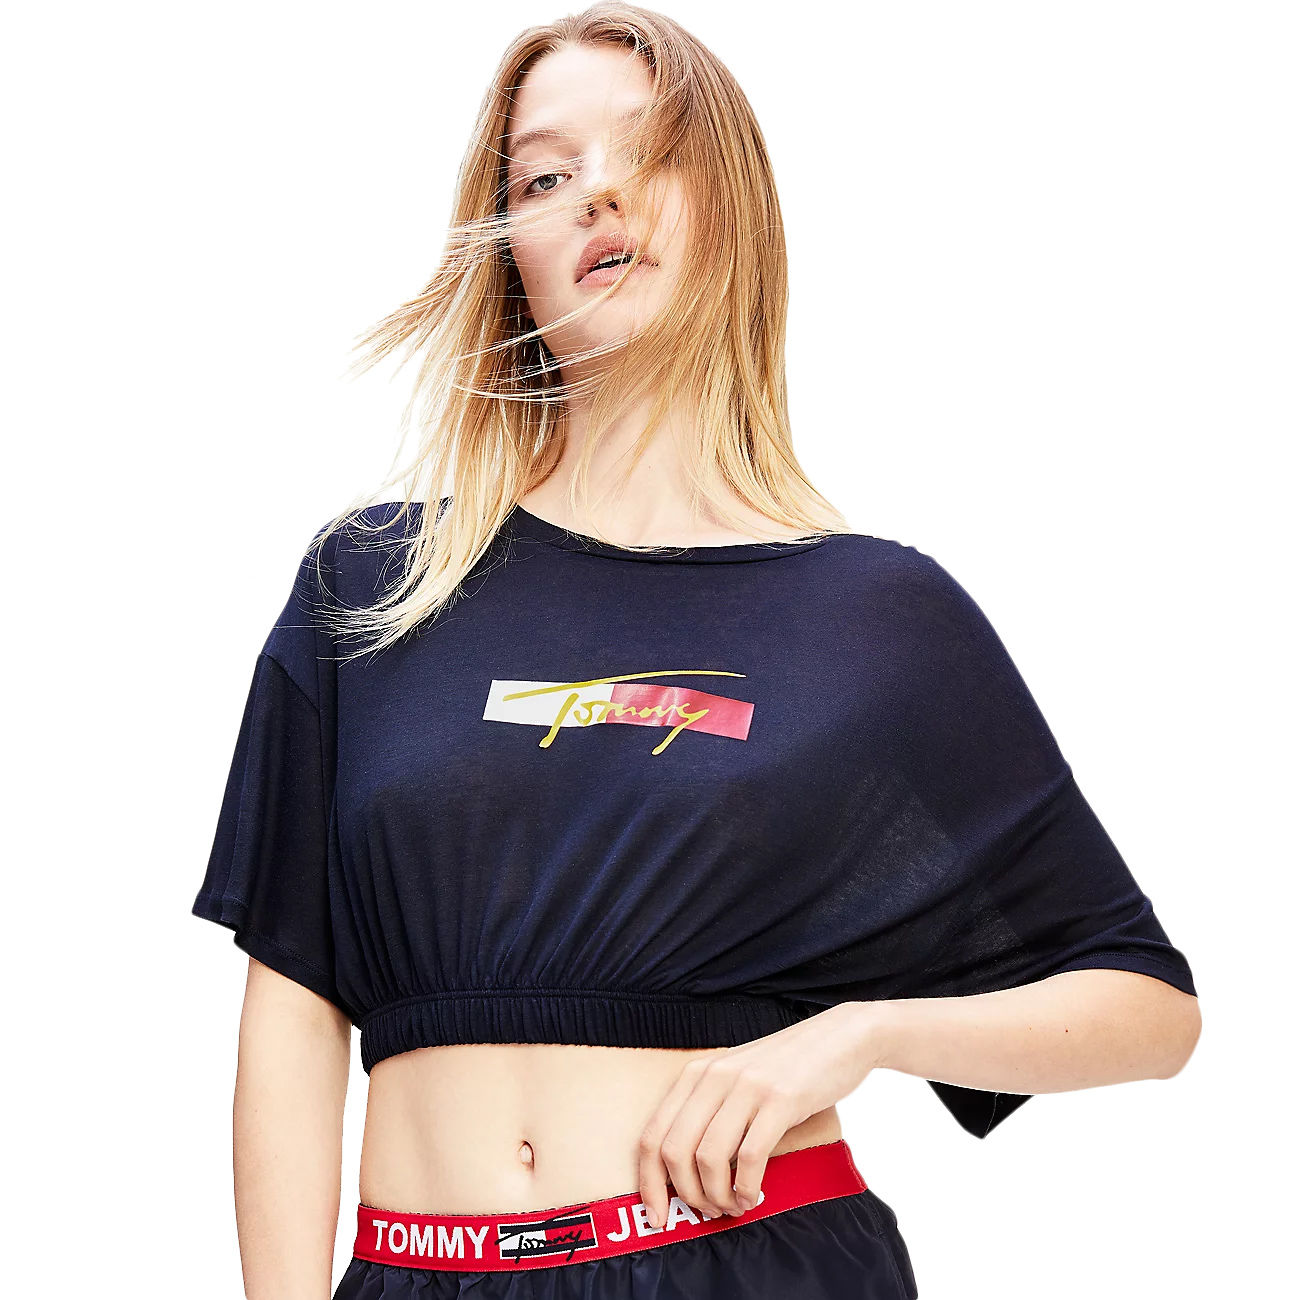 TOMMY HILFIGER T-SHIRT CROPPED CON ELASTICO Donna Desert Sky